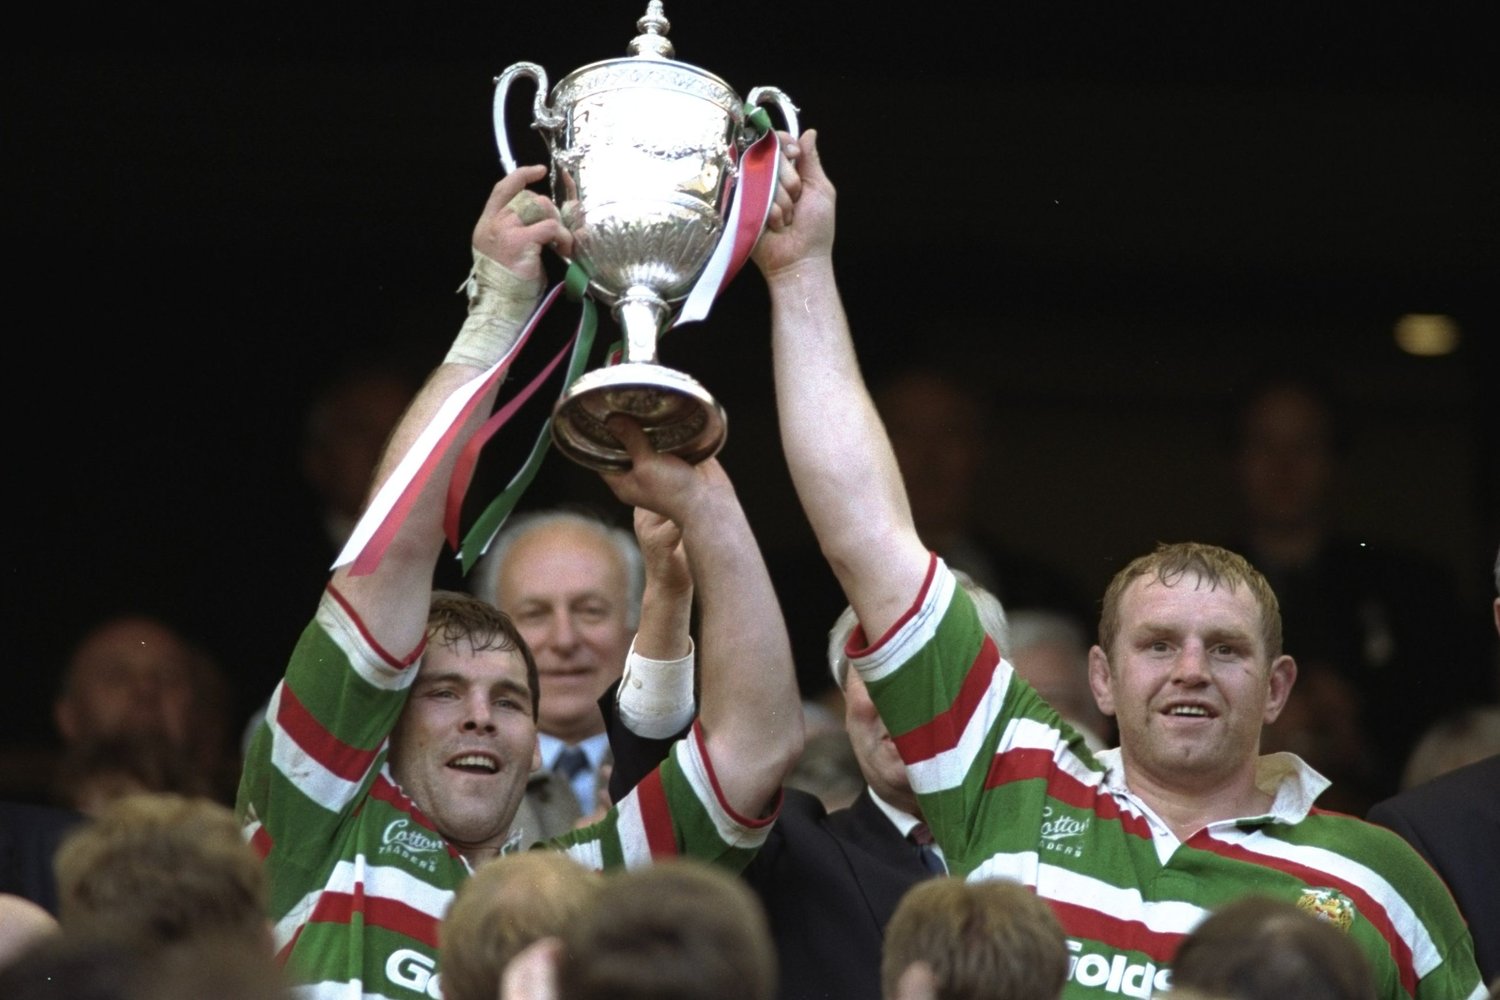 Tigers claim victory in the 96/97 RFU Knockout Cup